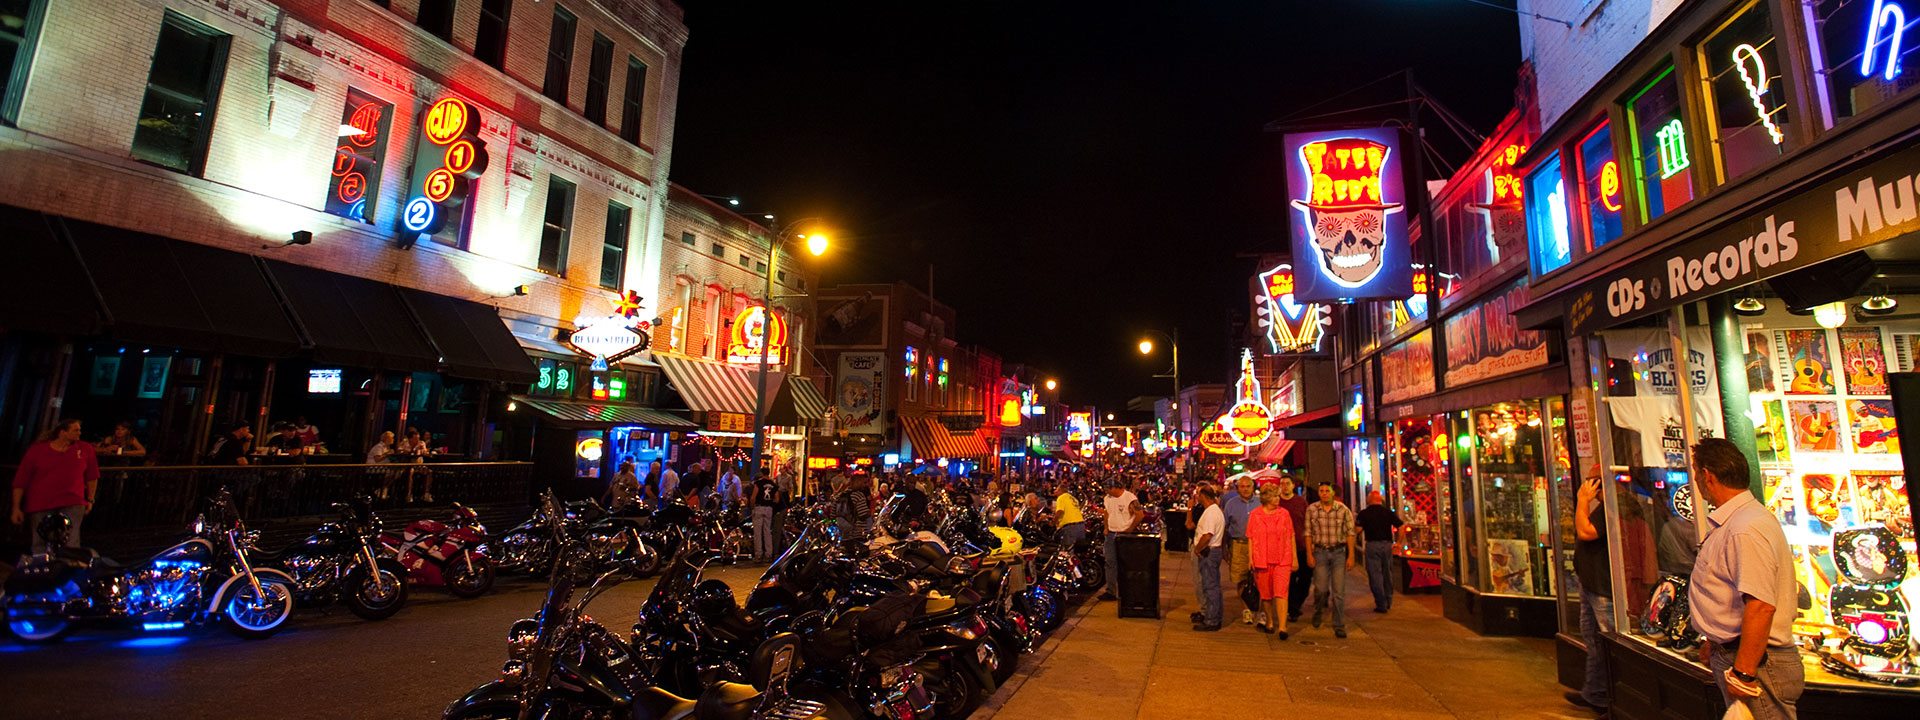 Memphis Tennessee Street With Shops & Bars